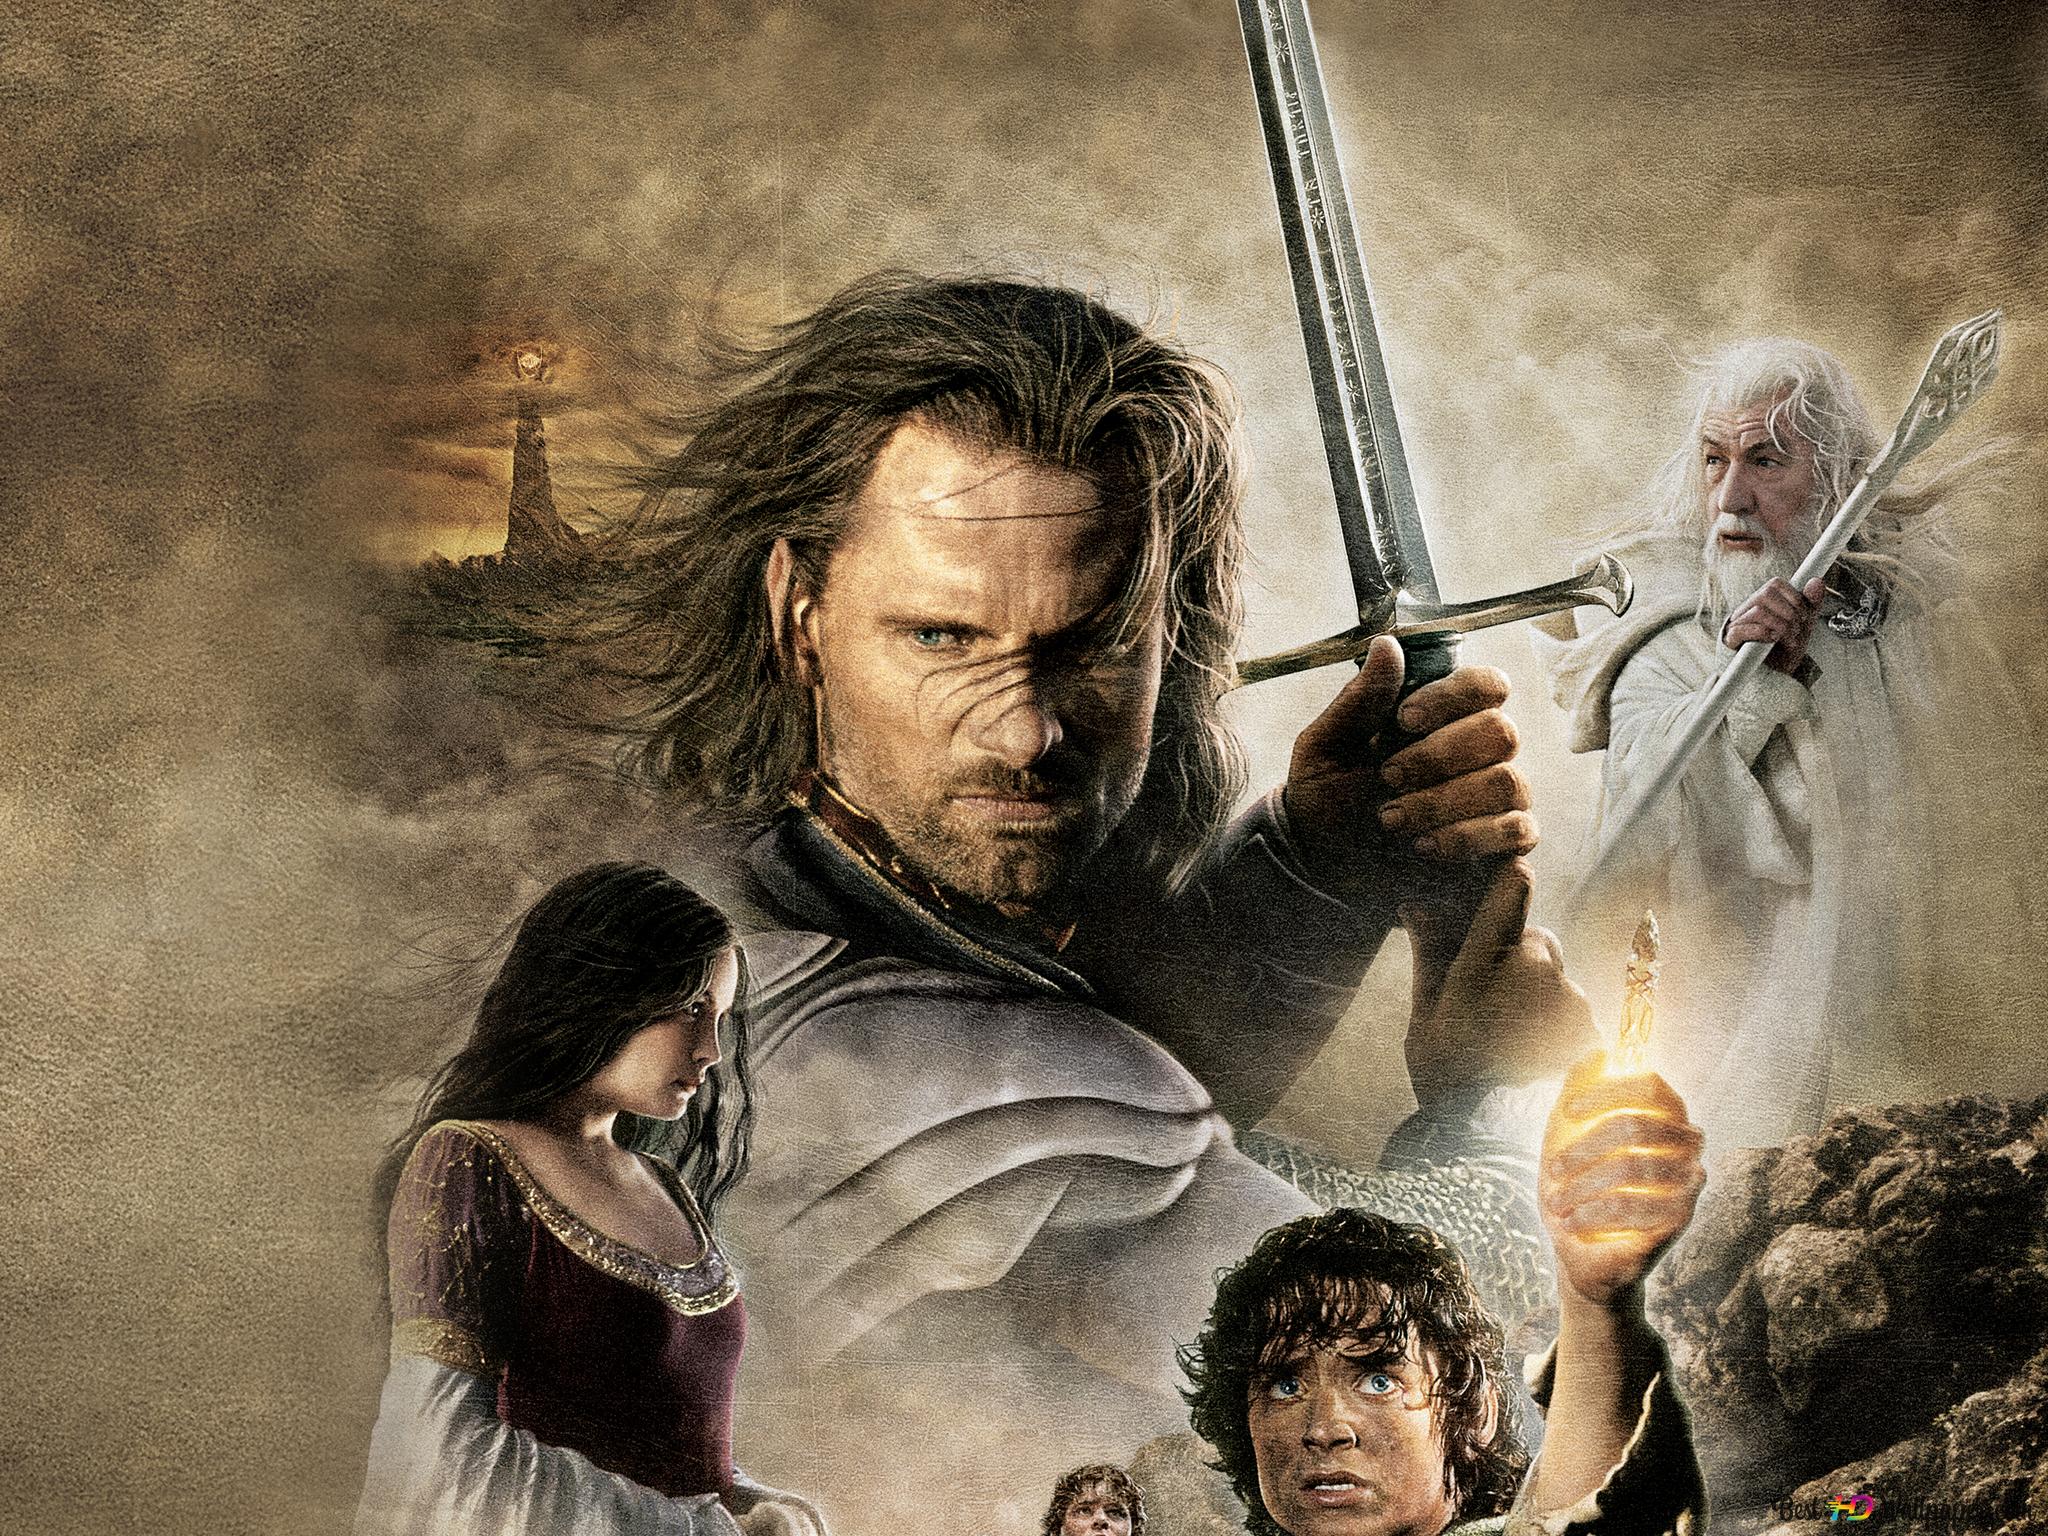 The Lord Of The Rings: The Return Of The King Hintergrundbild 2048x1536. The Lord of The Rings & The Return of The King 4K wallpaper download